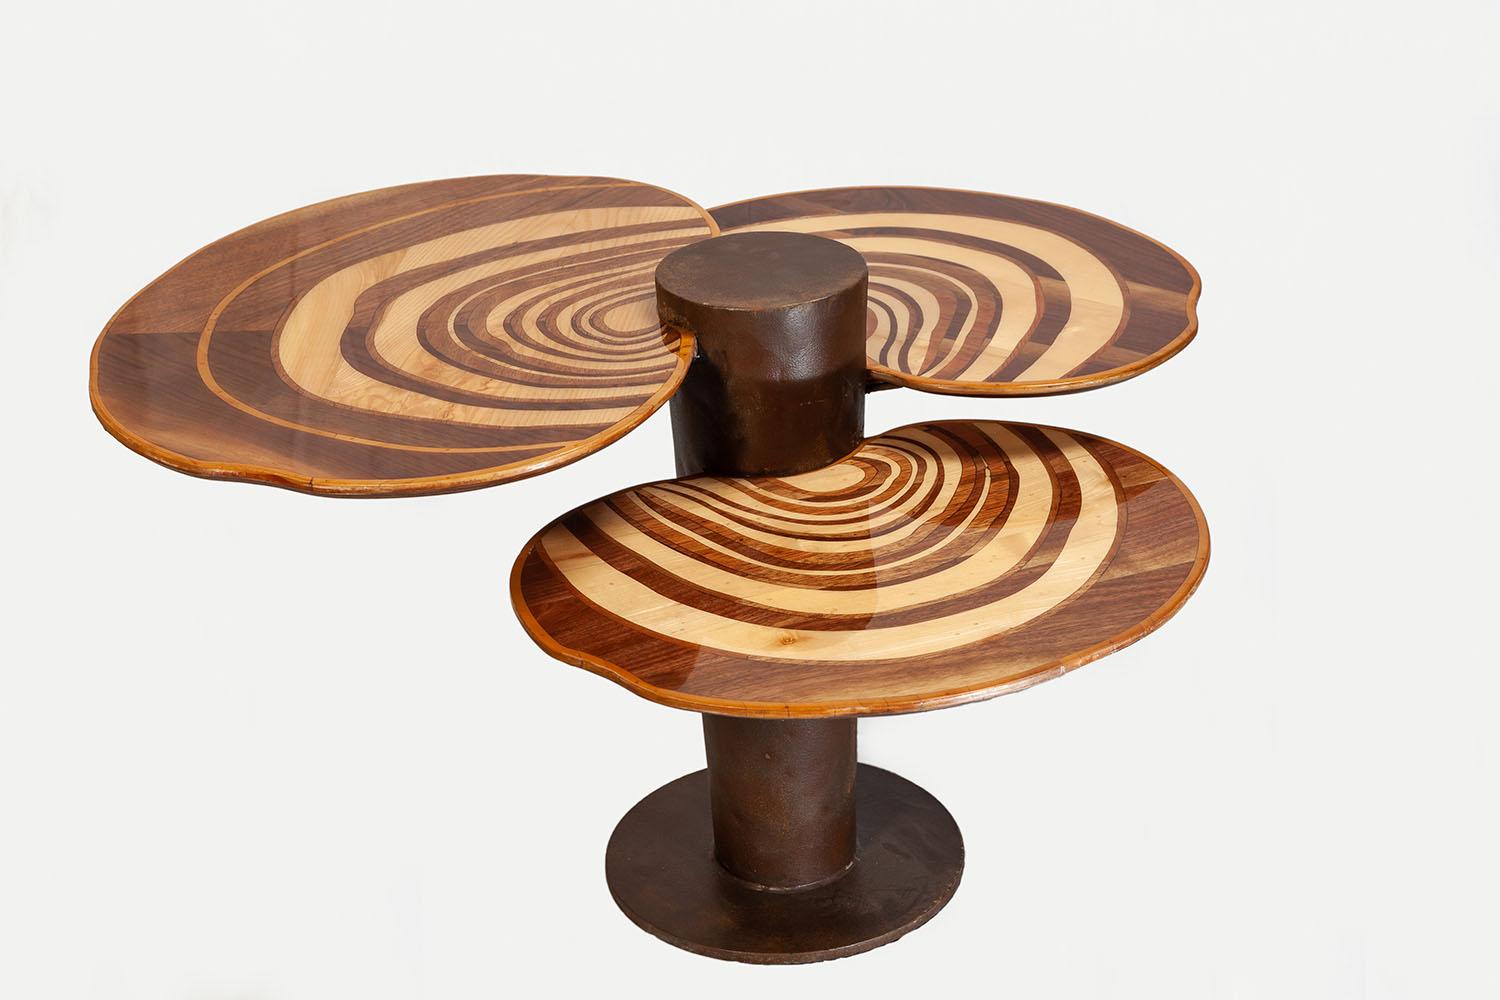 Invite a piece of nature into your home with the Maitake Walnut Coffee Table. This remarkable design draws inspiration from forest mushrooms and the natural curves only found in nature. Each table is handcrafted with walnut, allowing you to